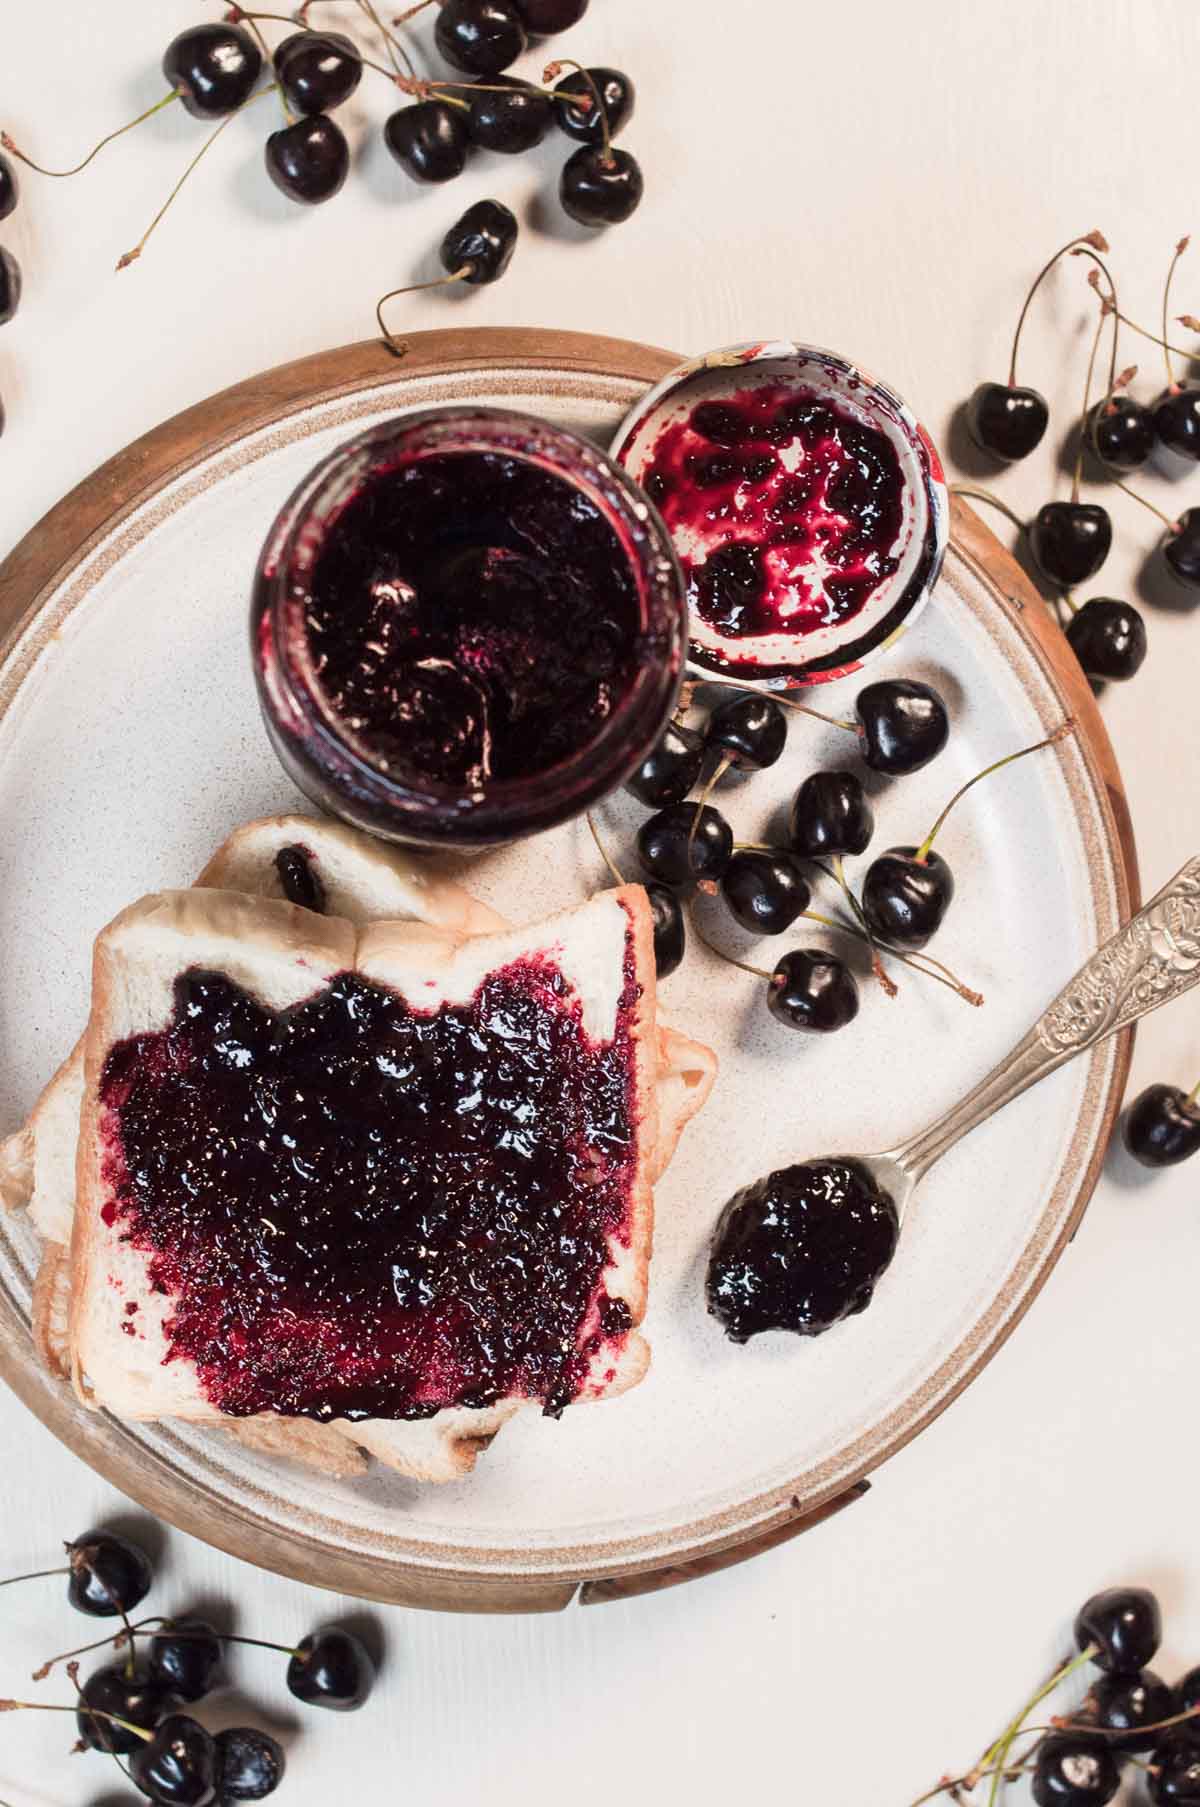 Cherry preserve in a jar with cherries all around and a lice of jam toast in the background.